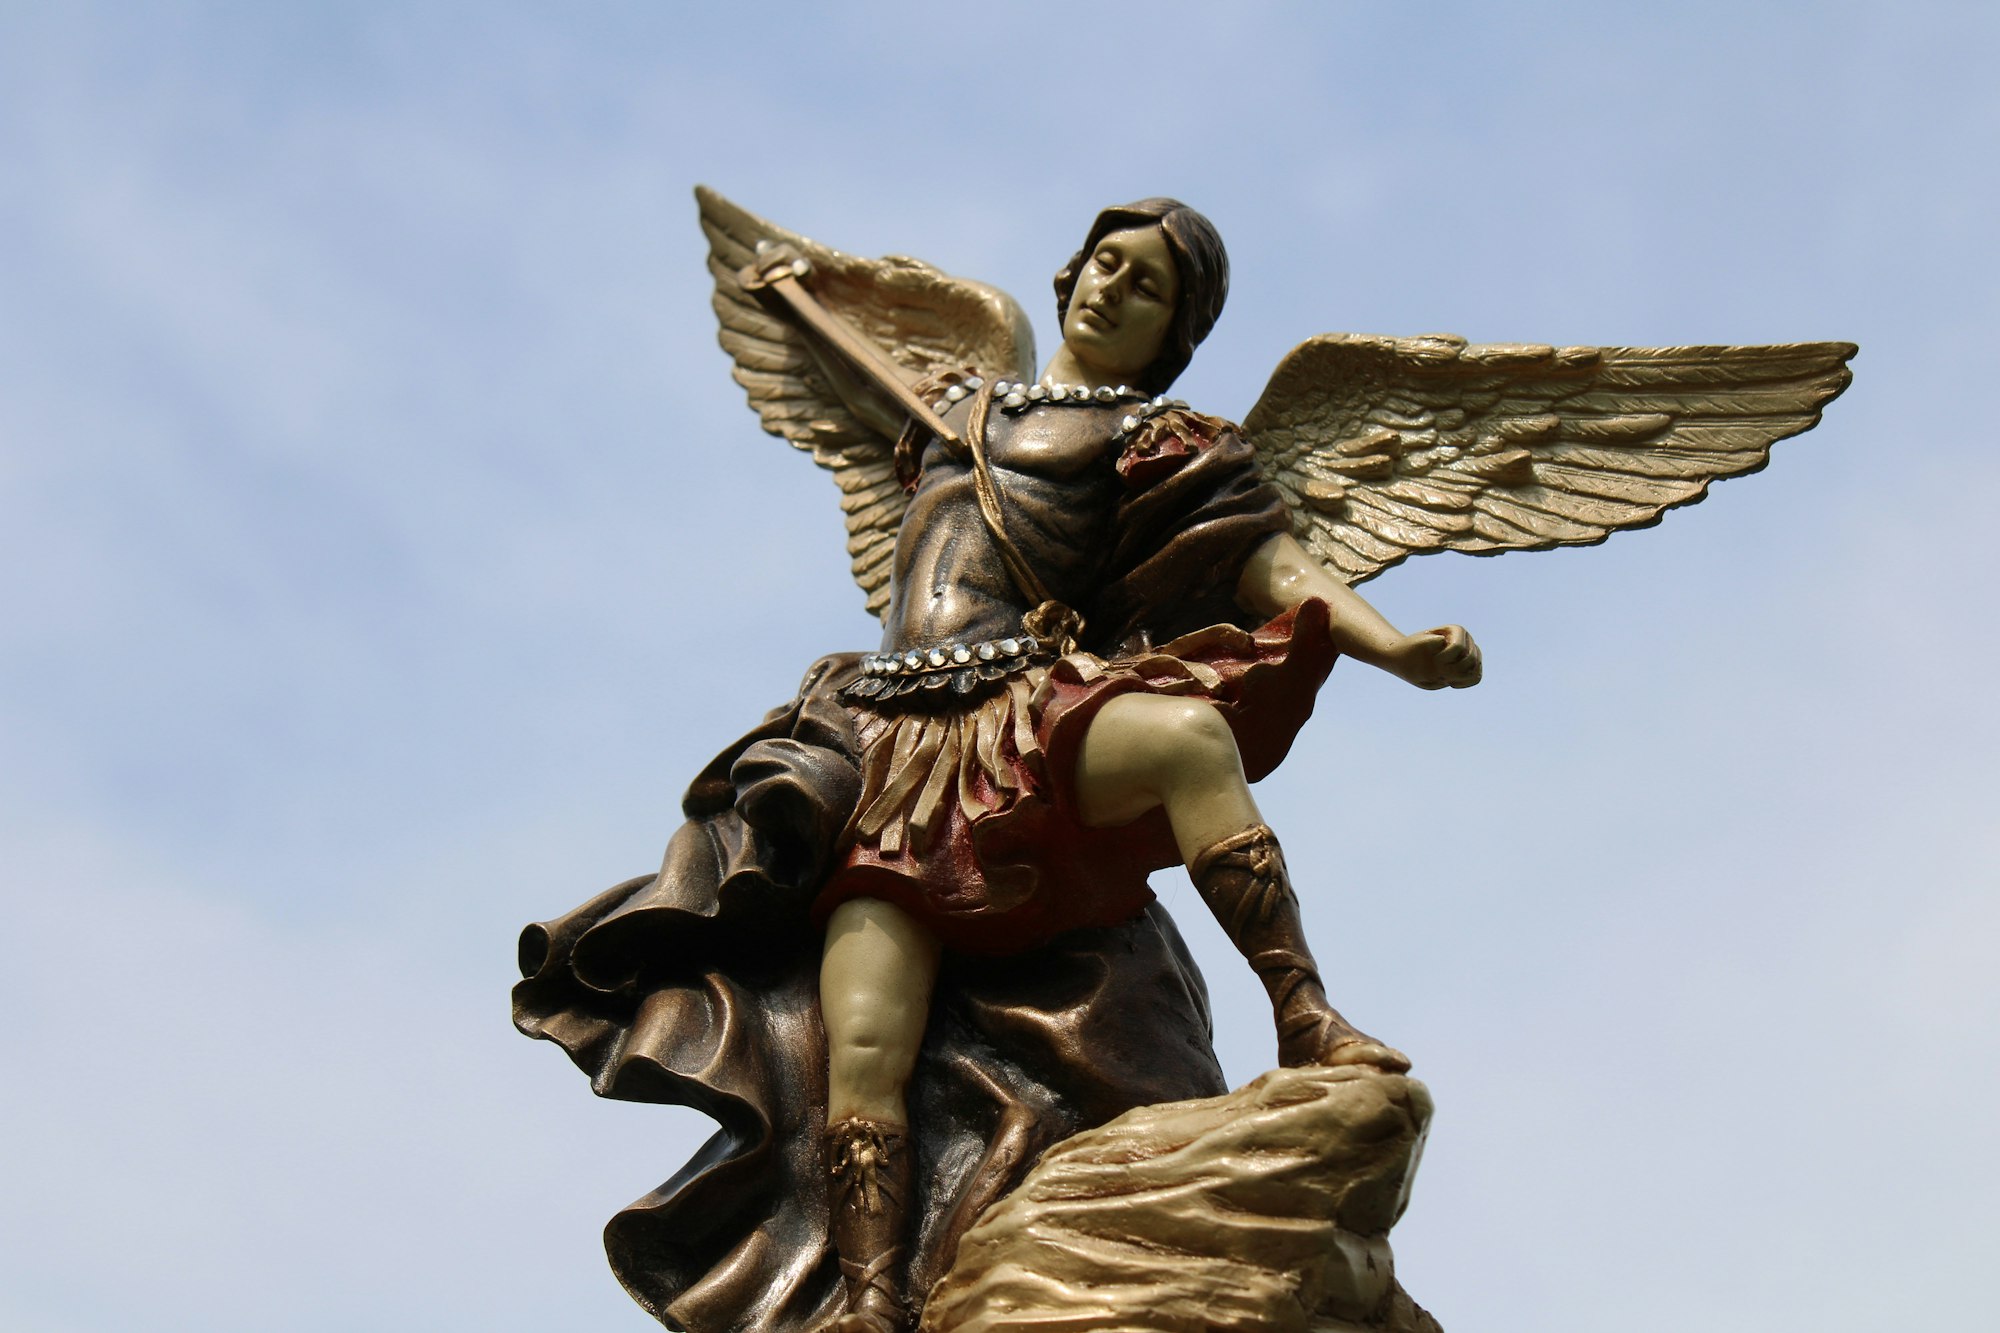 Archangel Michael's Help: how to ask for Archangel Michael's help and guidance